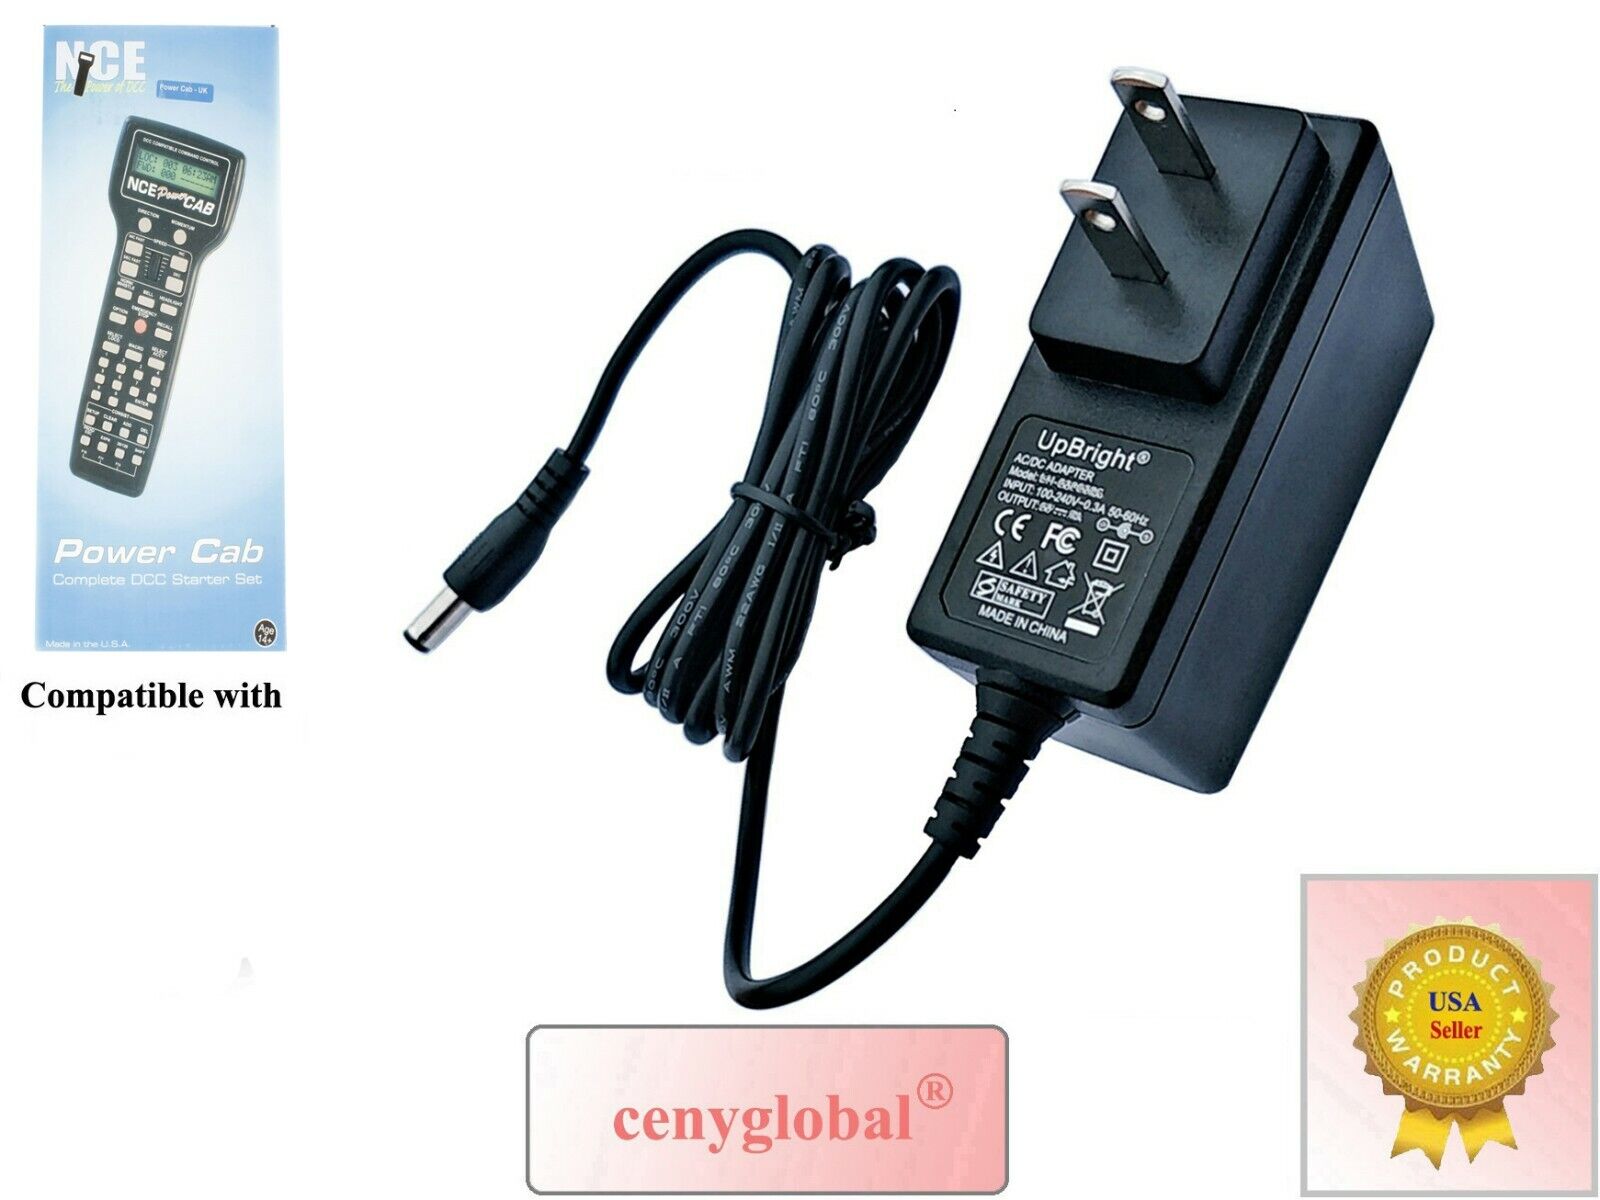 13.5V AC Adapter For NCE Power Cab Series NCE5240221 221 DCC P114 Power Charger